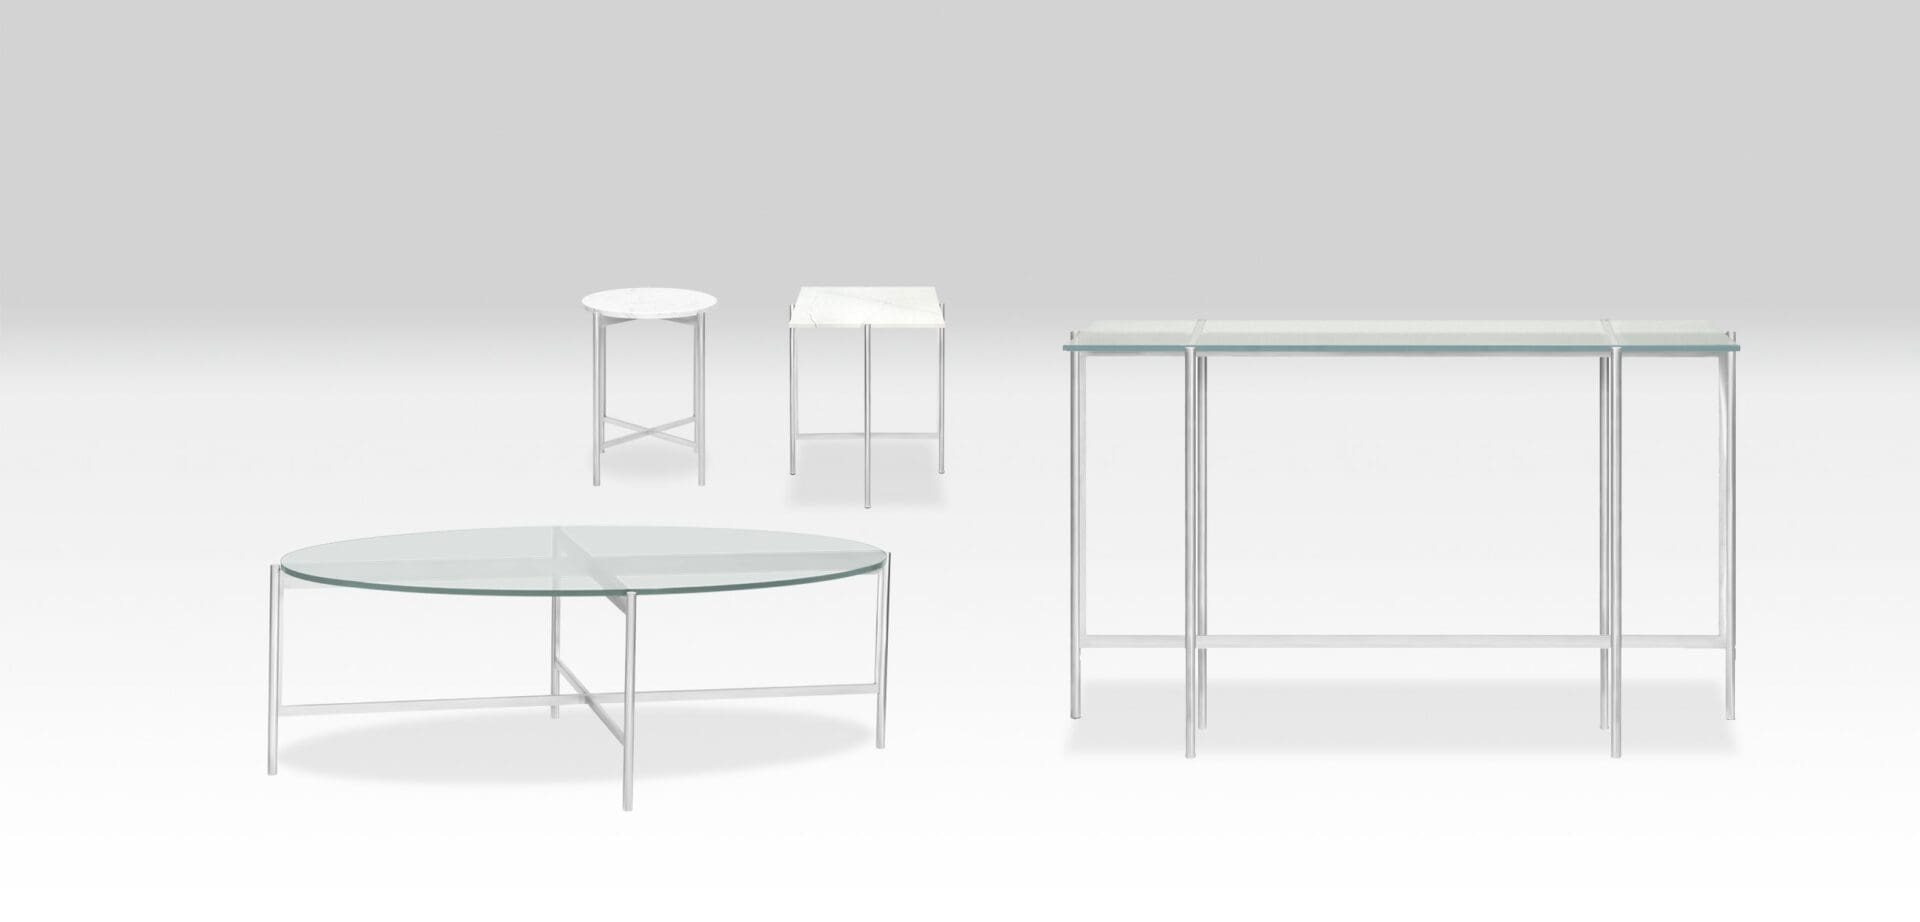 A white table and some tables in the middle of a room.